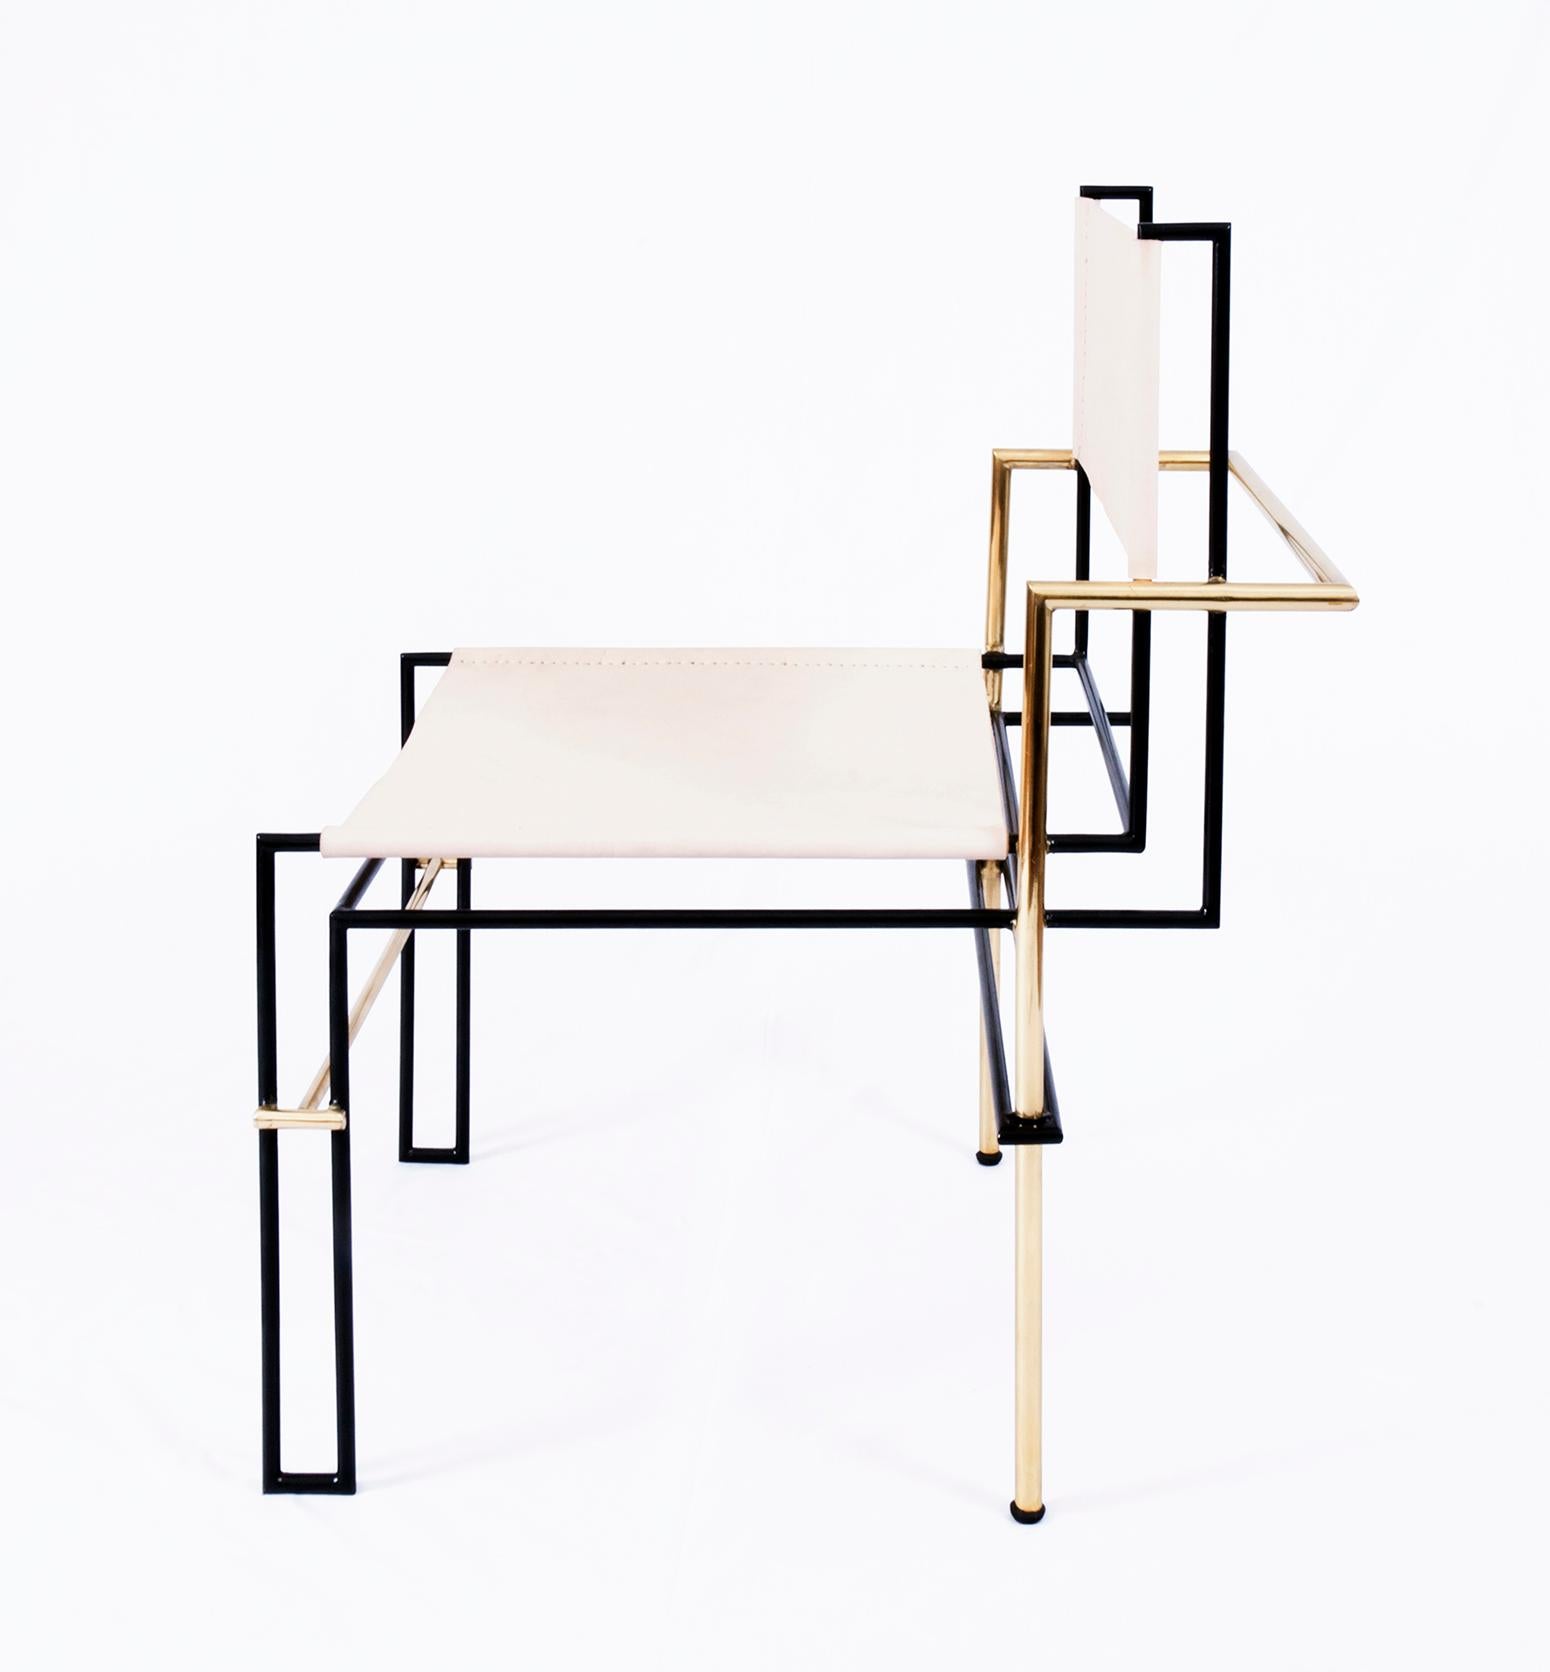 Inspired by Laszlo Moholy-Nagy's photograms, the Casbah chair by Mexico City–based Nomade Atelier is all linear balance, gravity, and angular movement. A complex tubular brass structure frames a natural vachetta leather seat and back sling that will